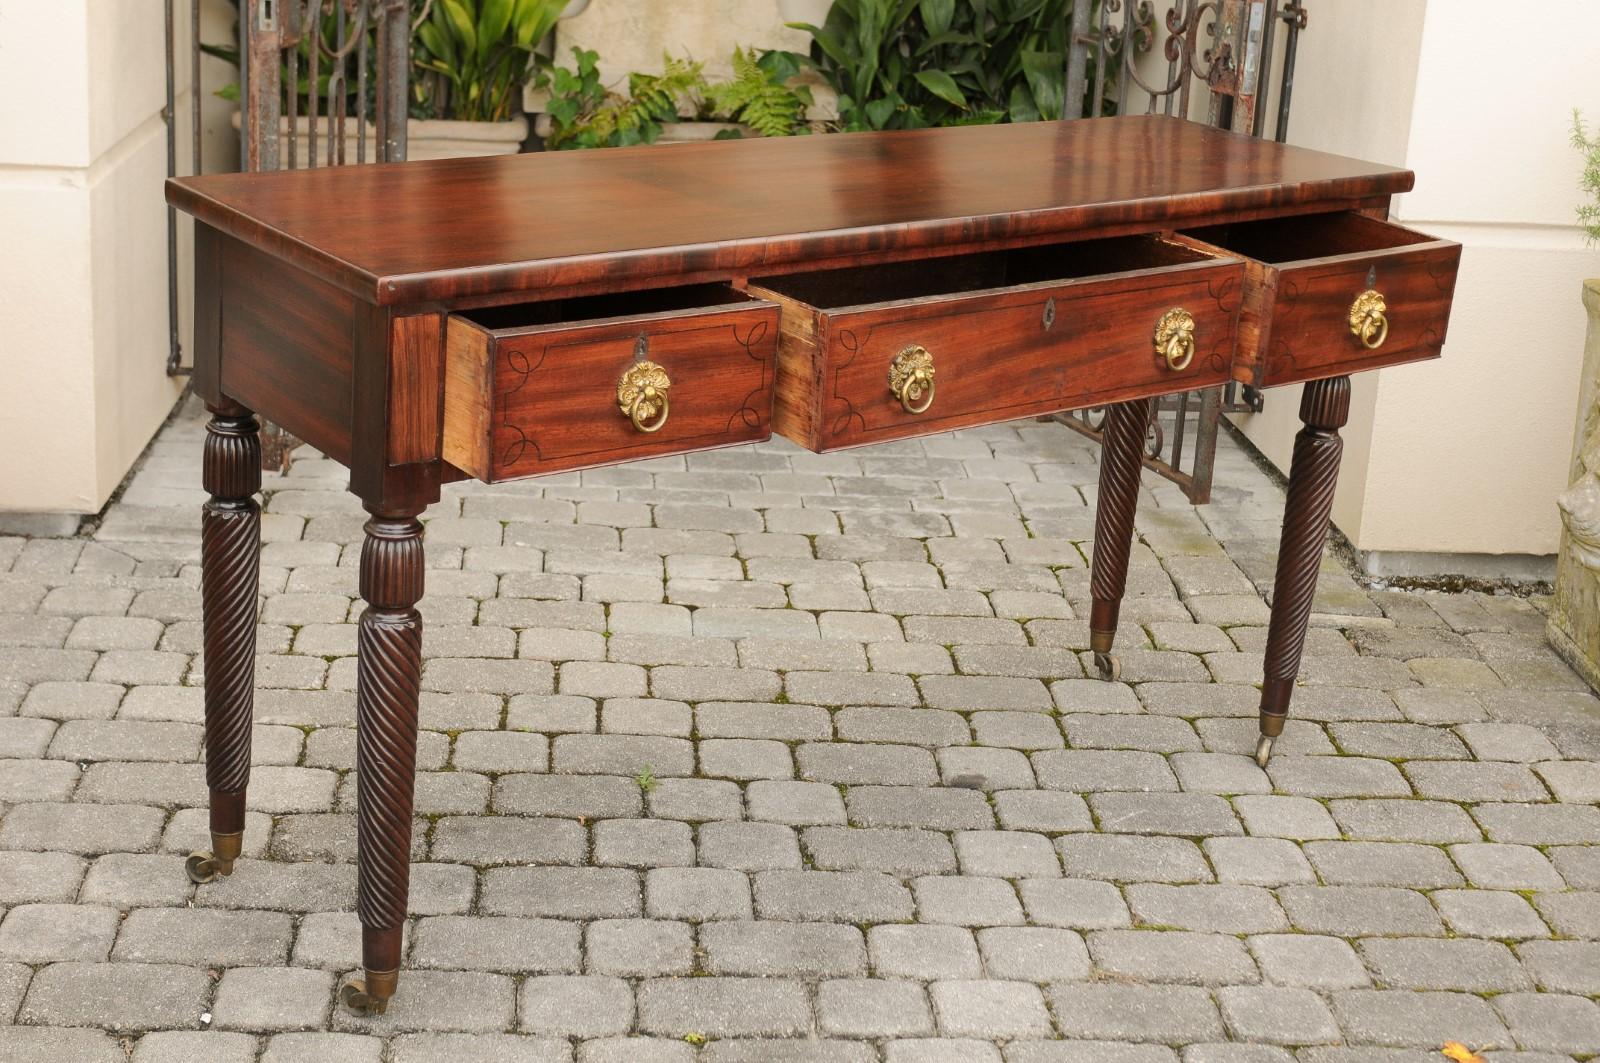 Anglo-Indian 1850s Mahogany Server with Drawers and Twisted Legs on Casters 2